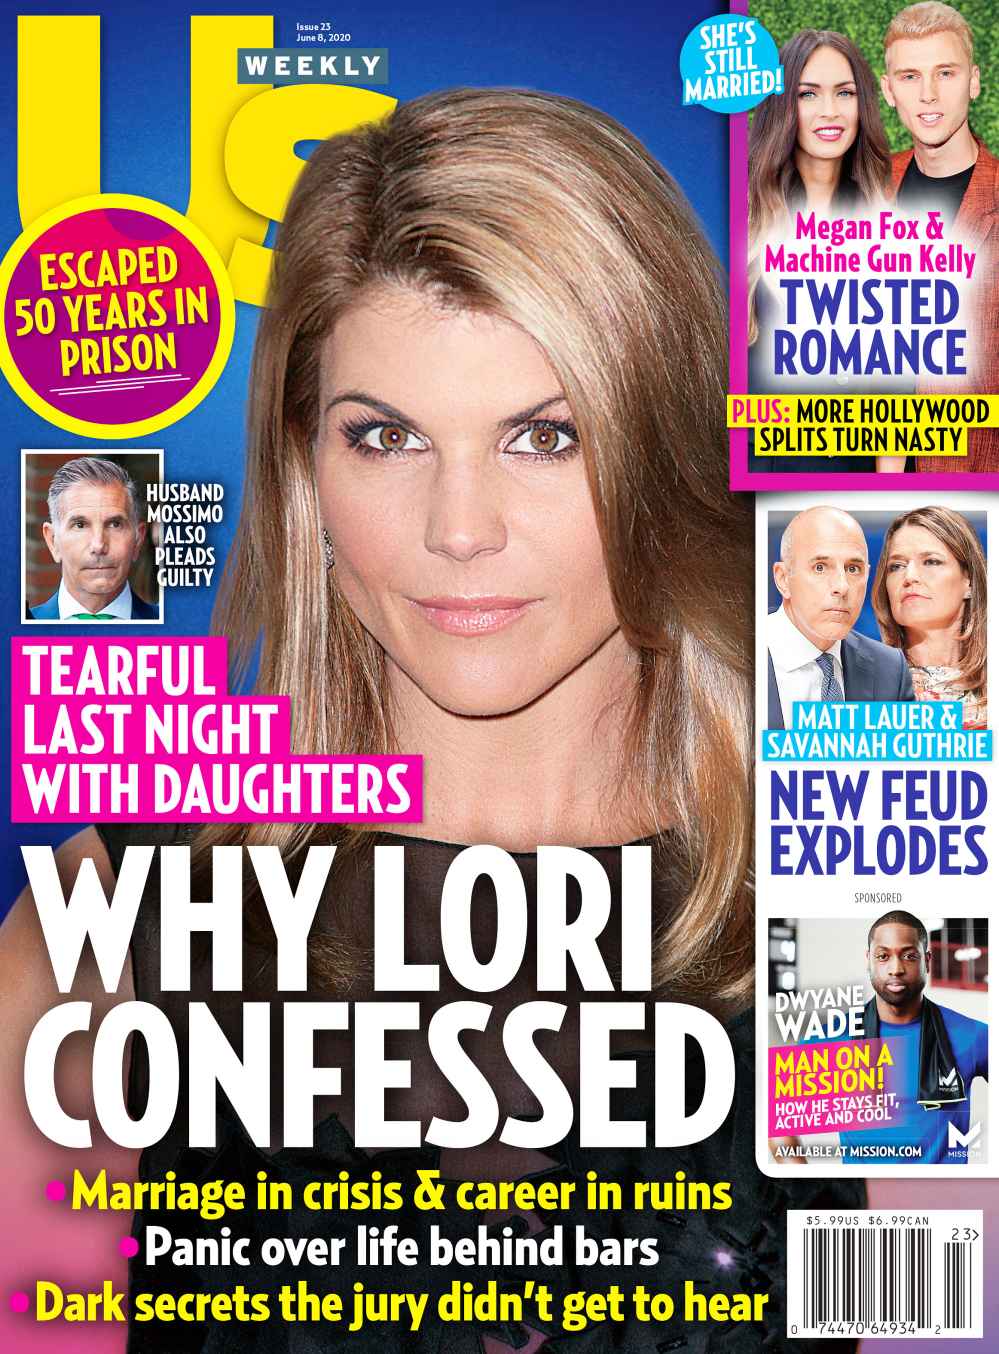 Us Weekly Cover Issue 2320 Lori Loughlin